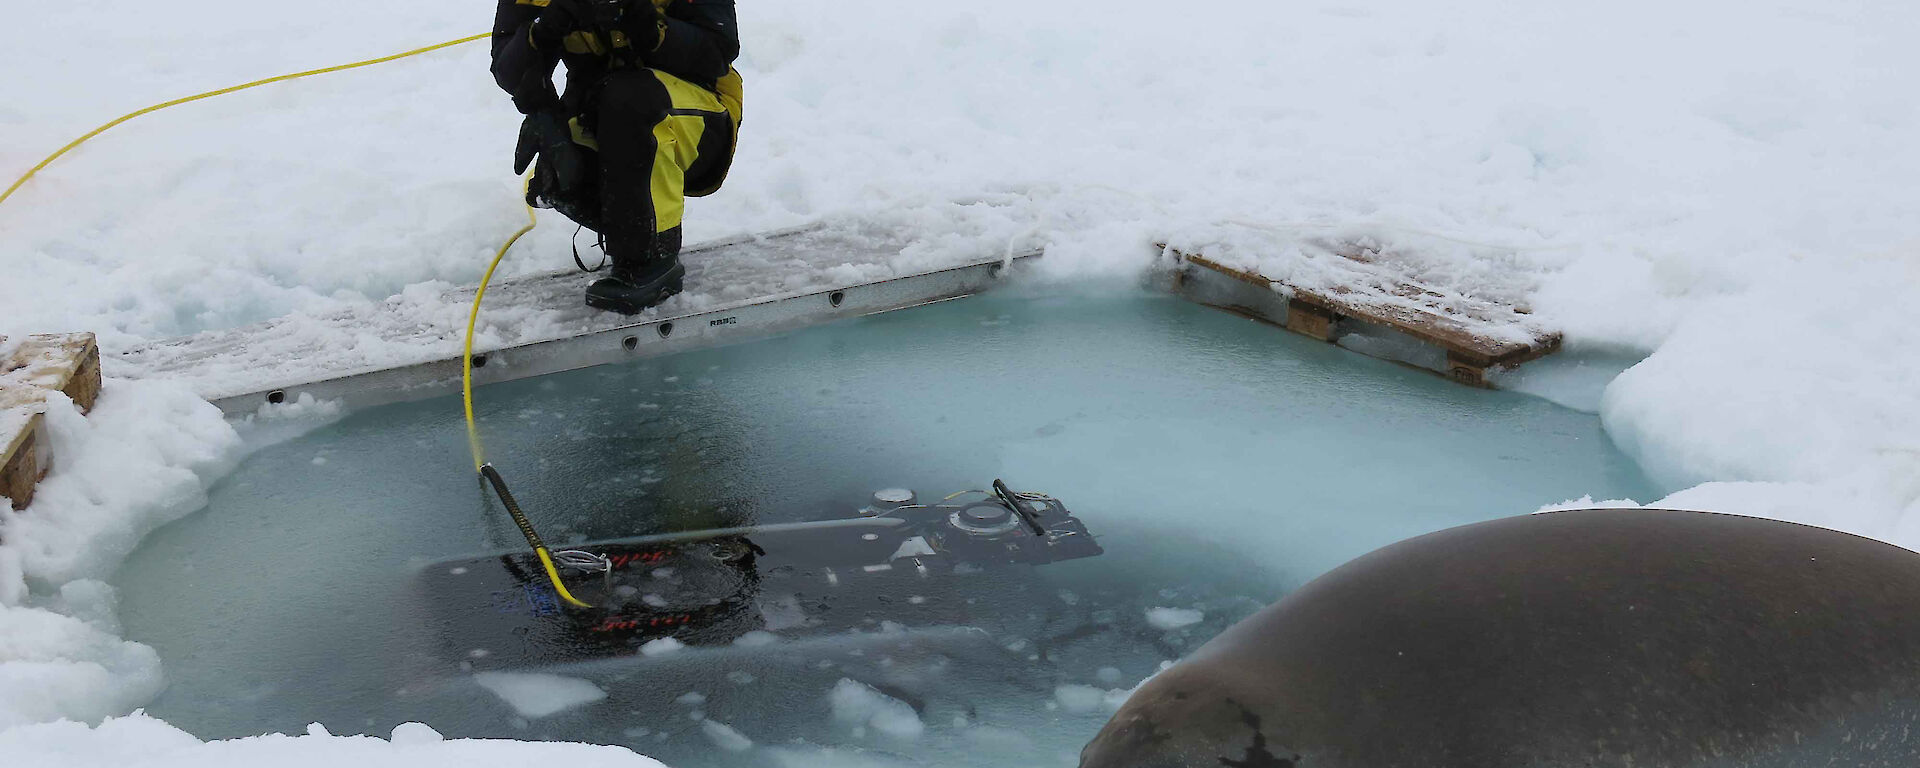 A crabeater seal checks out the Remotely Operated Vehicle deployment.